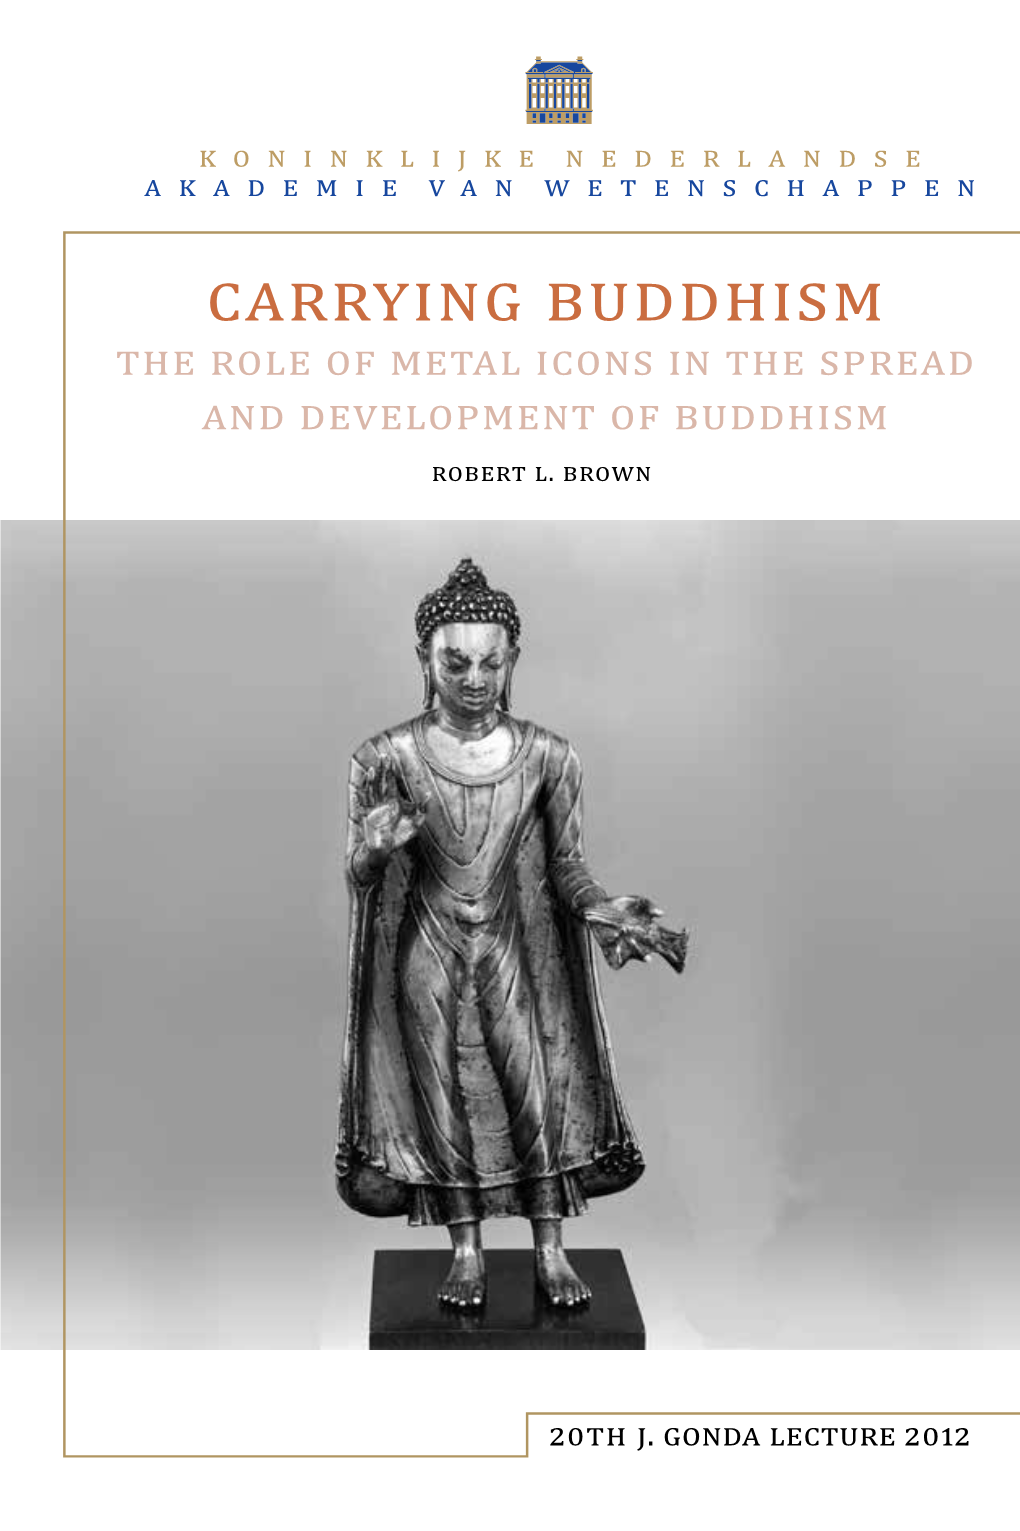 Carrying Buddhism: the Role of Metal Icons in the Spread and Development of Buddhism 20Th J